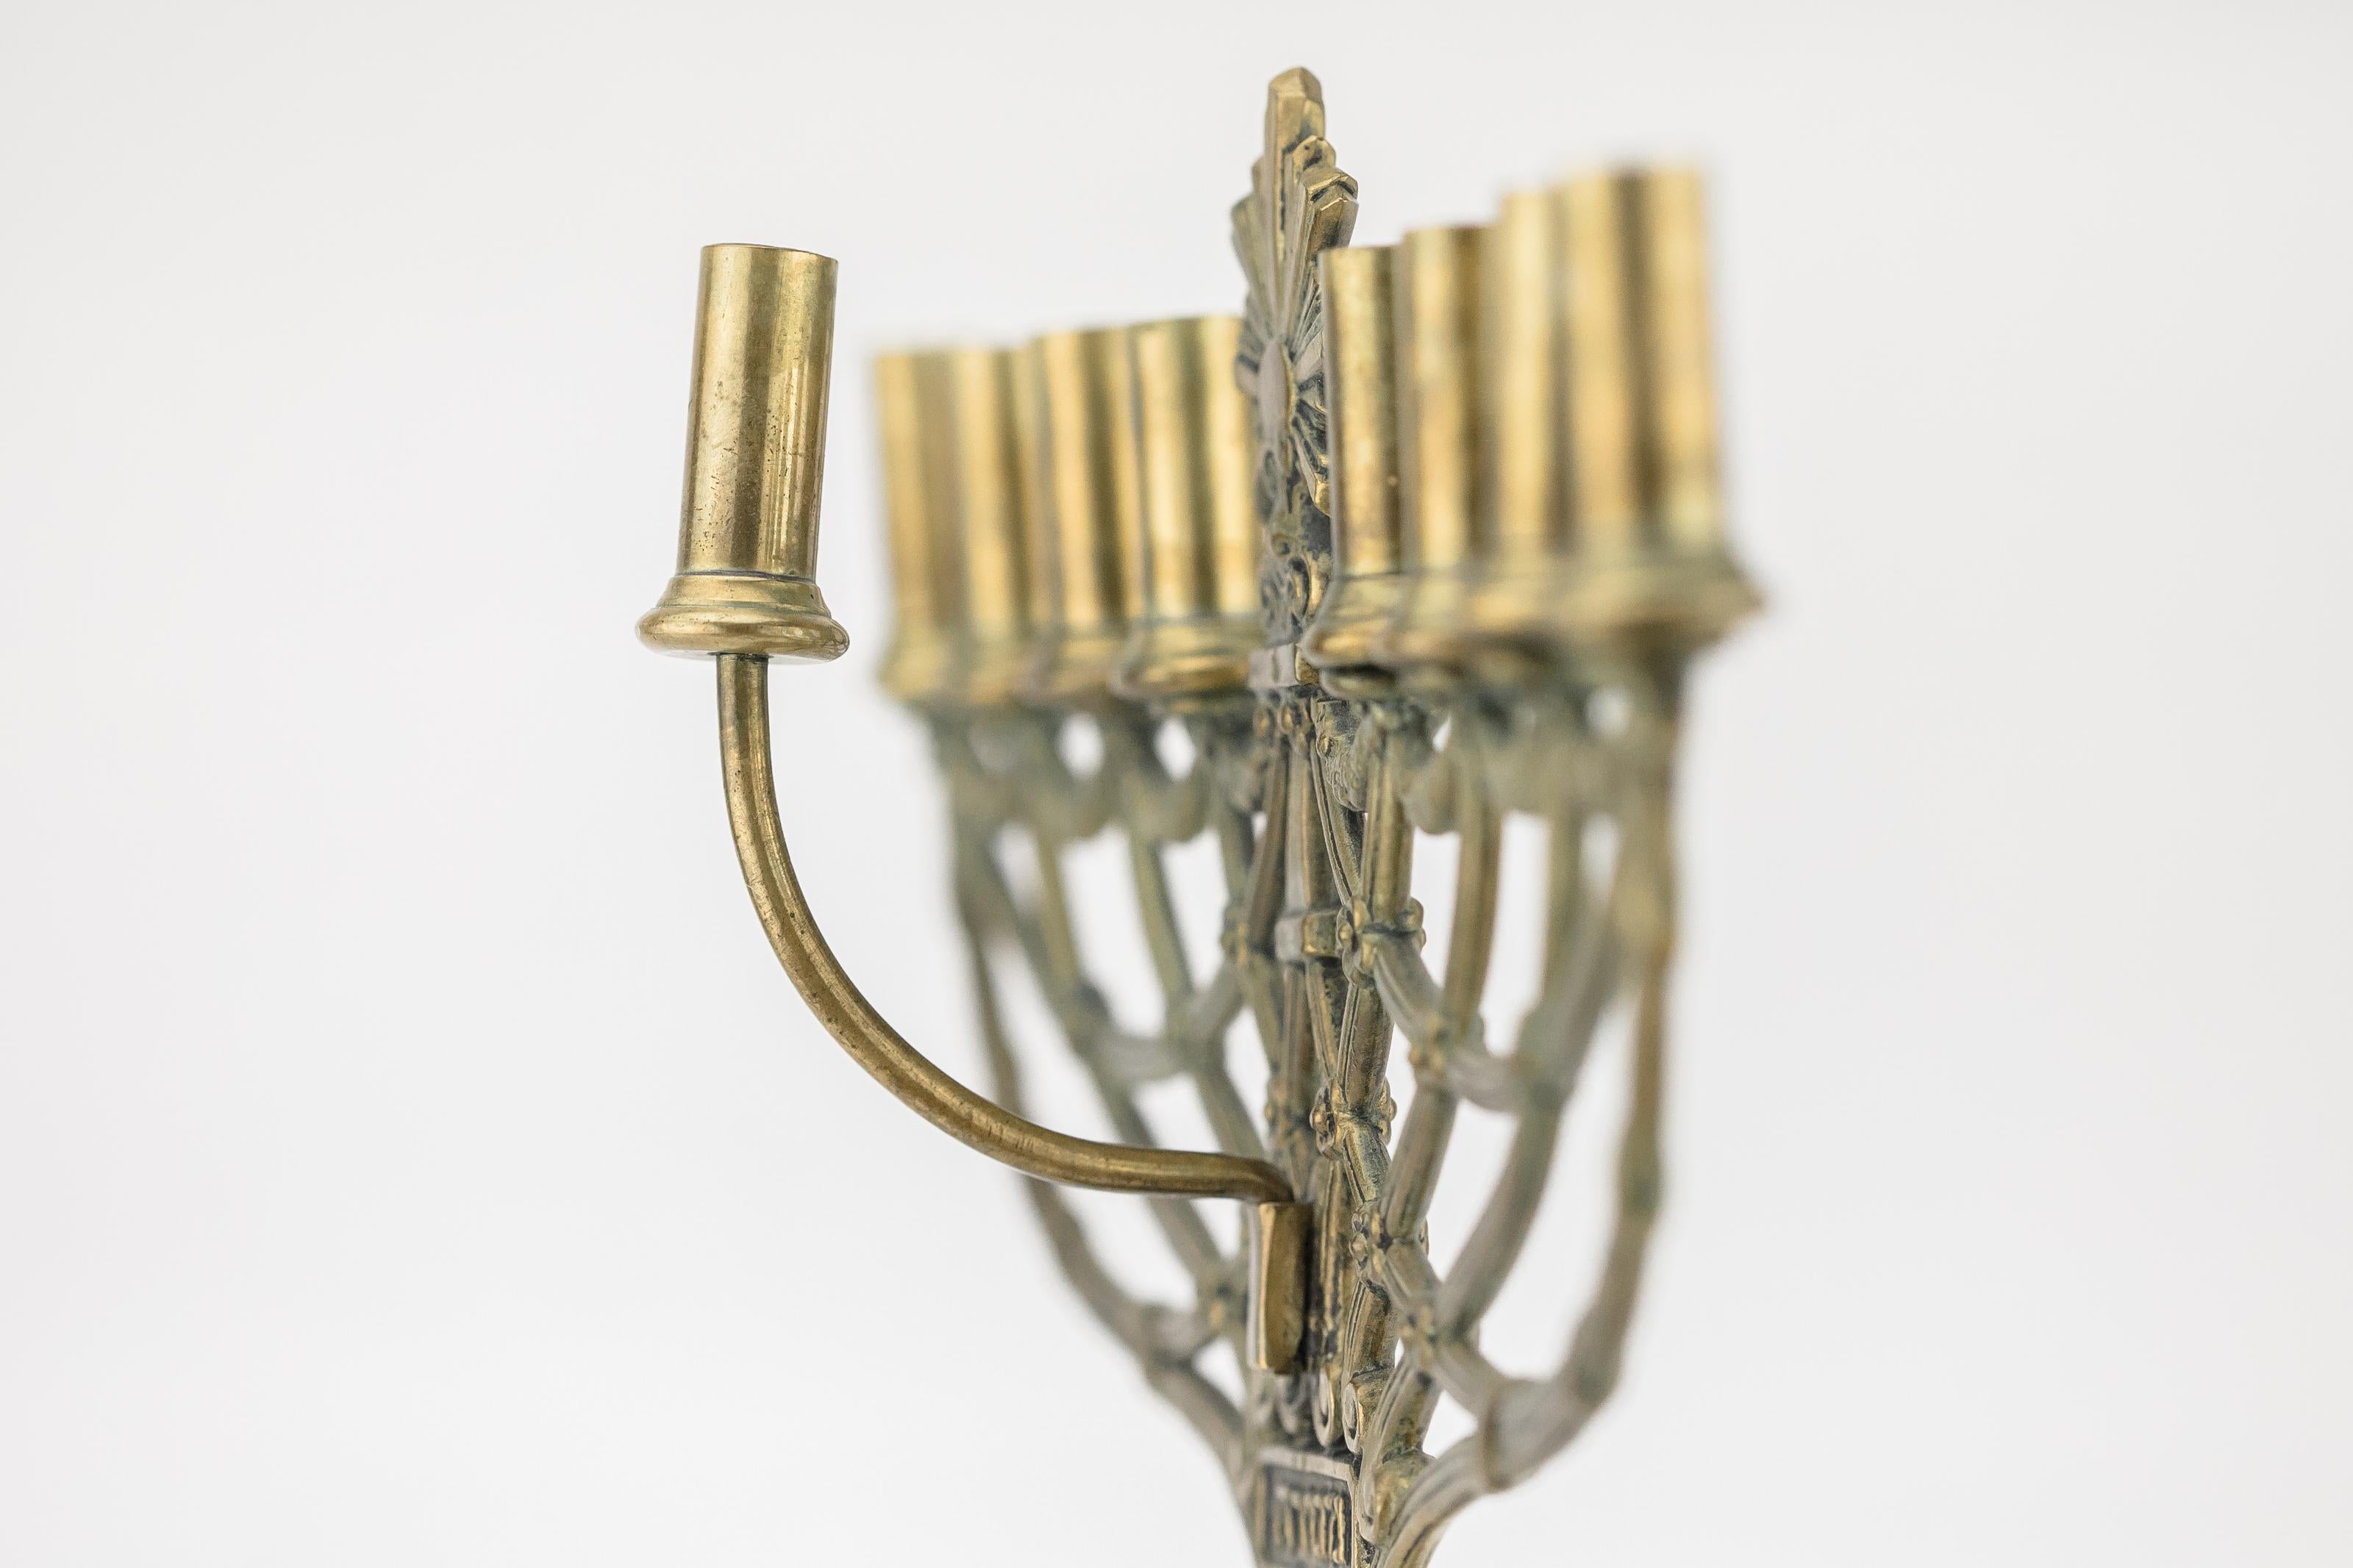 Egyptian-revival Hanukkah Lamp, Germany, circa 1890.
Expertly cast brass featuring highly detailed motifs such as a Star of David in a laurel wreath, upper portion comprised of twisted-rope forms topped by swags and finished with a sunburst. On